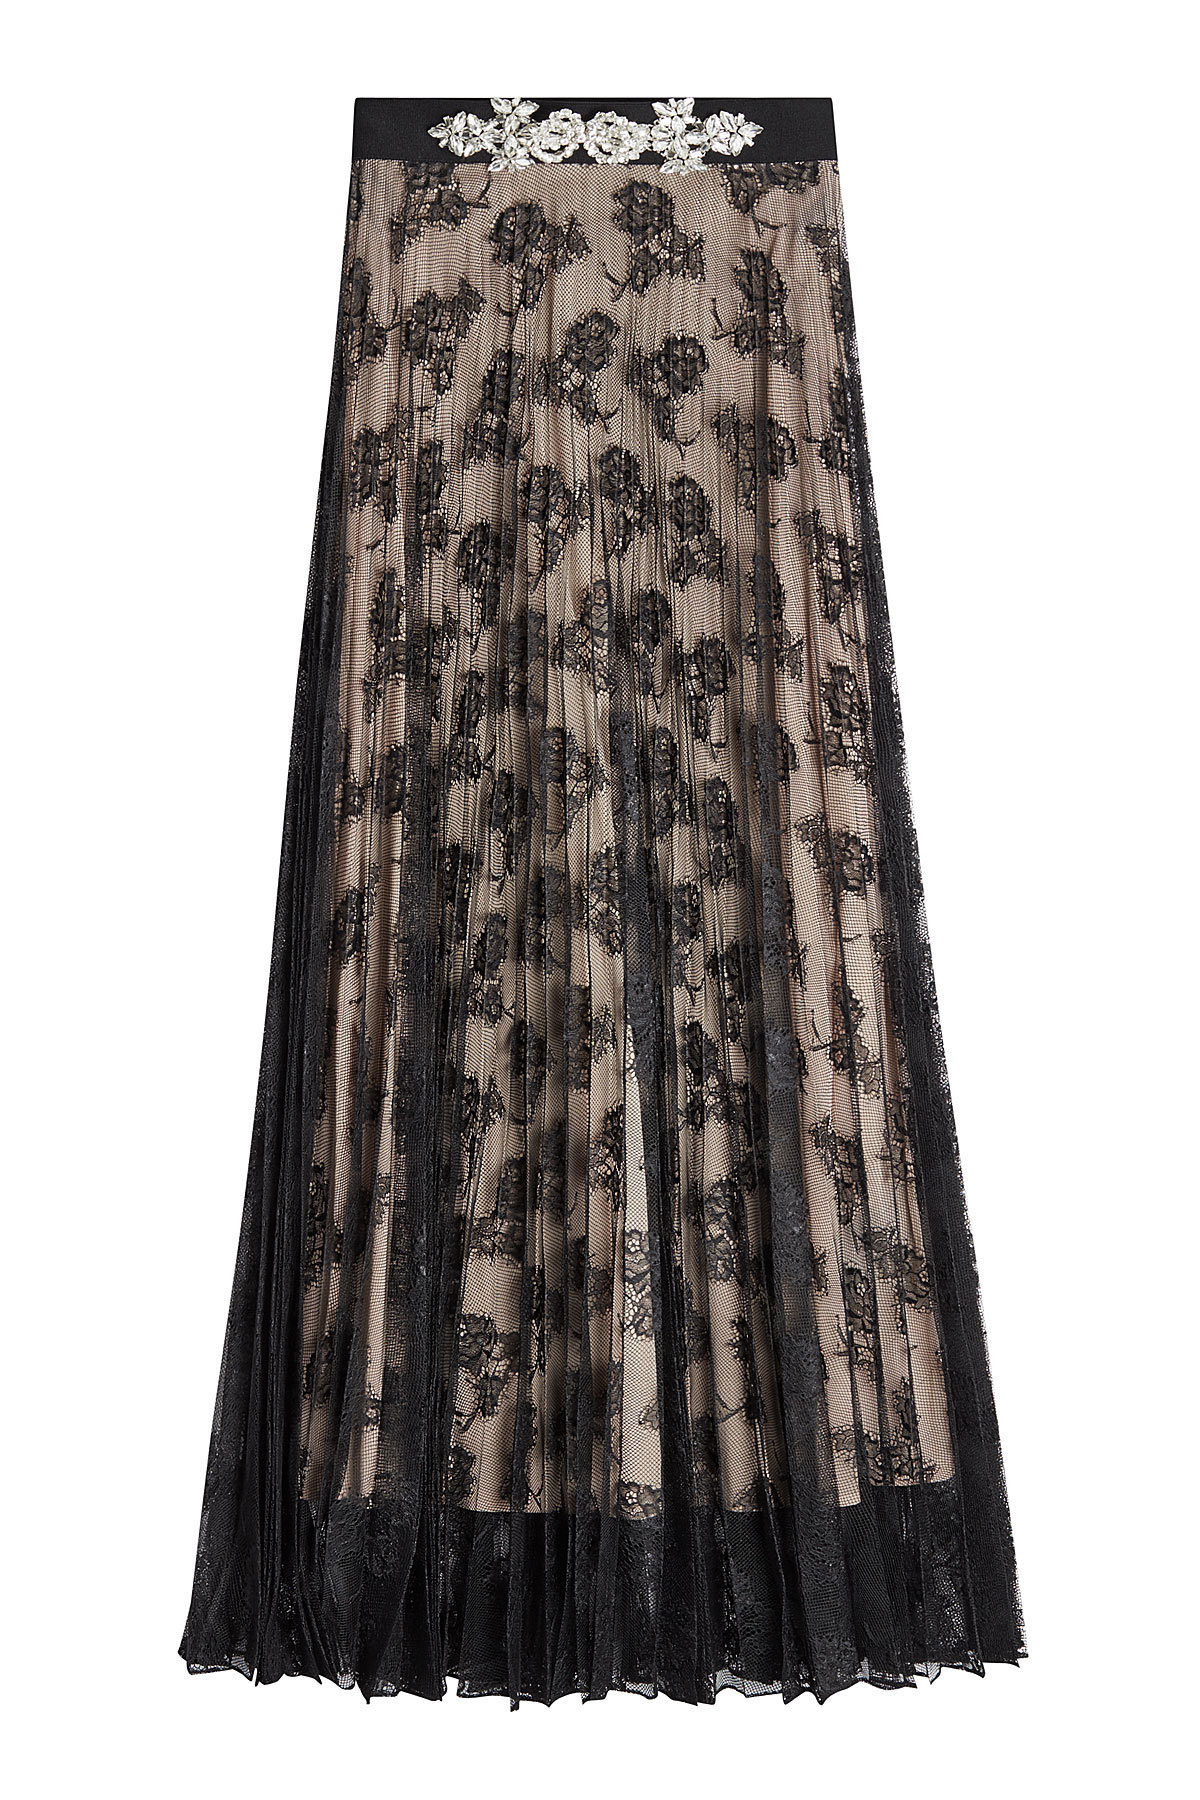 Christopher Kane - Lace Skirt with Embellishment